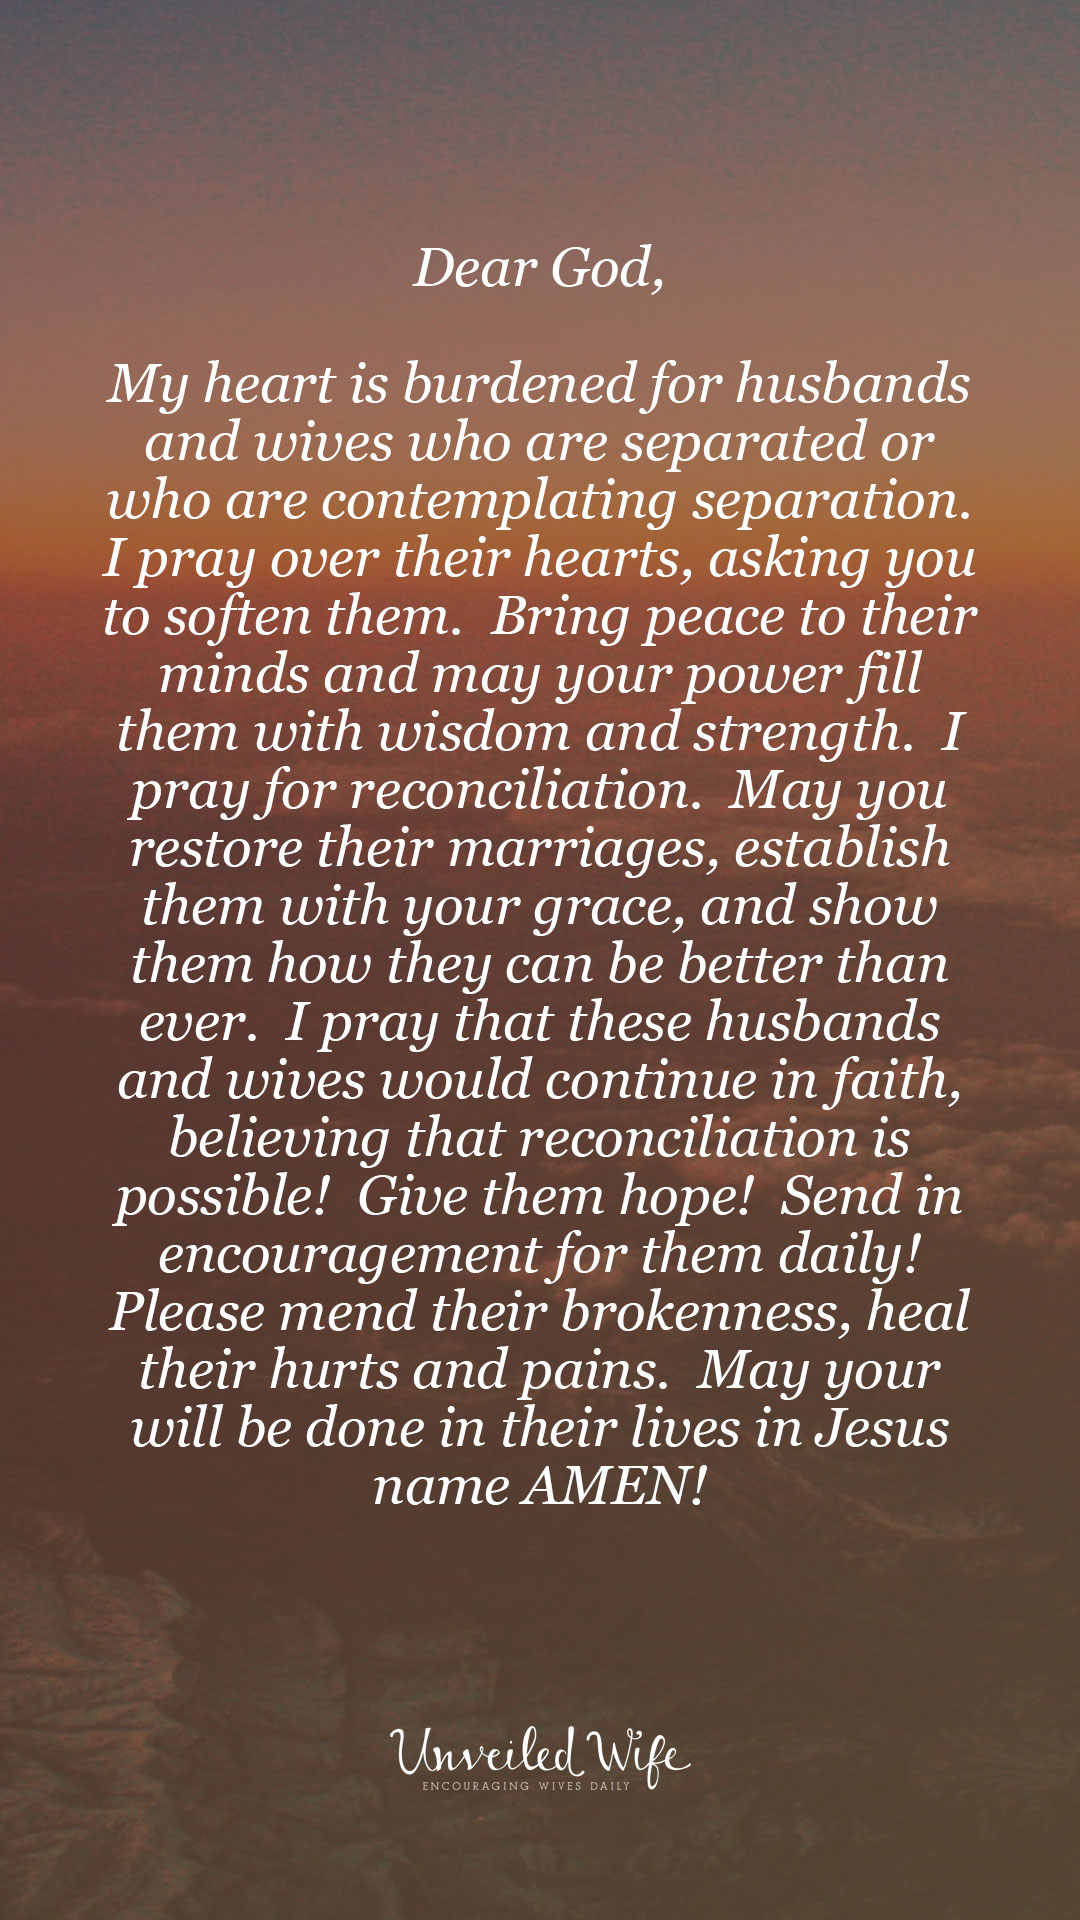 Prayer Of The Day – Reconciliation For Marriages That Are Separated